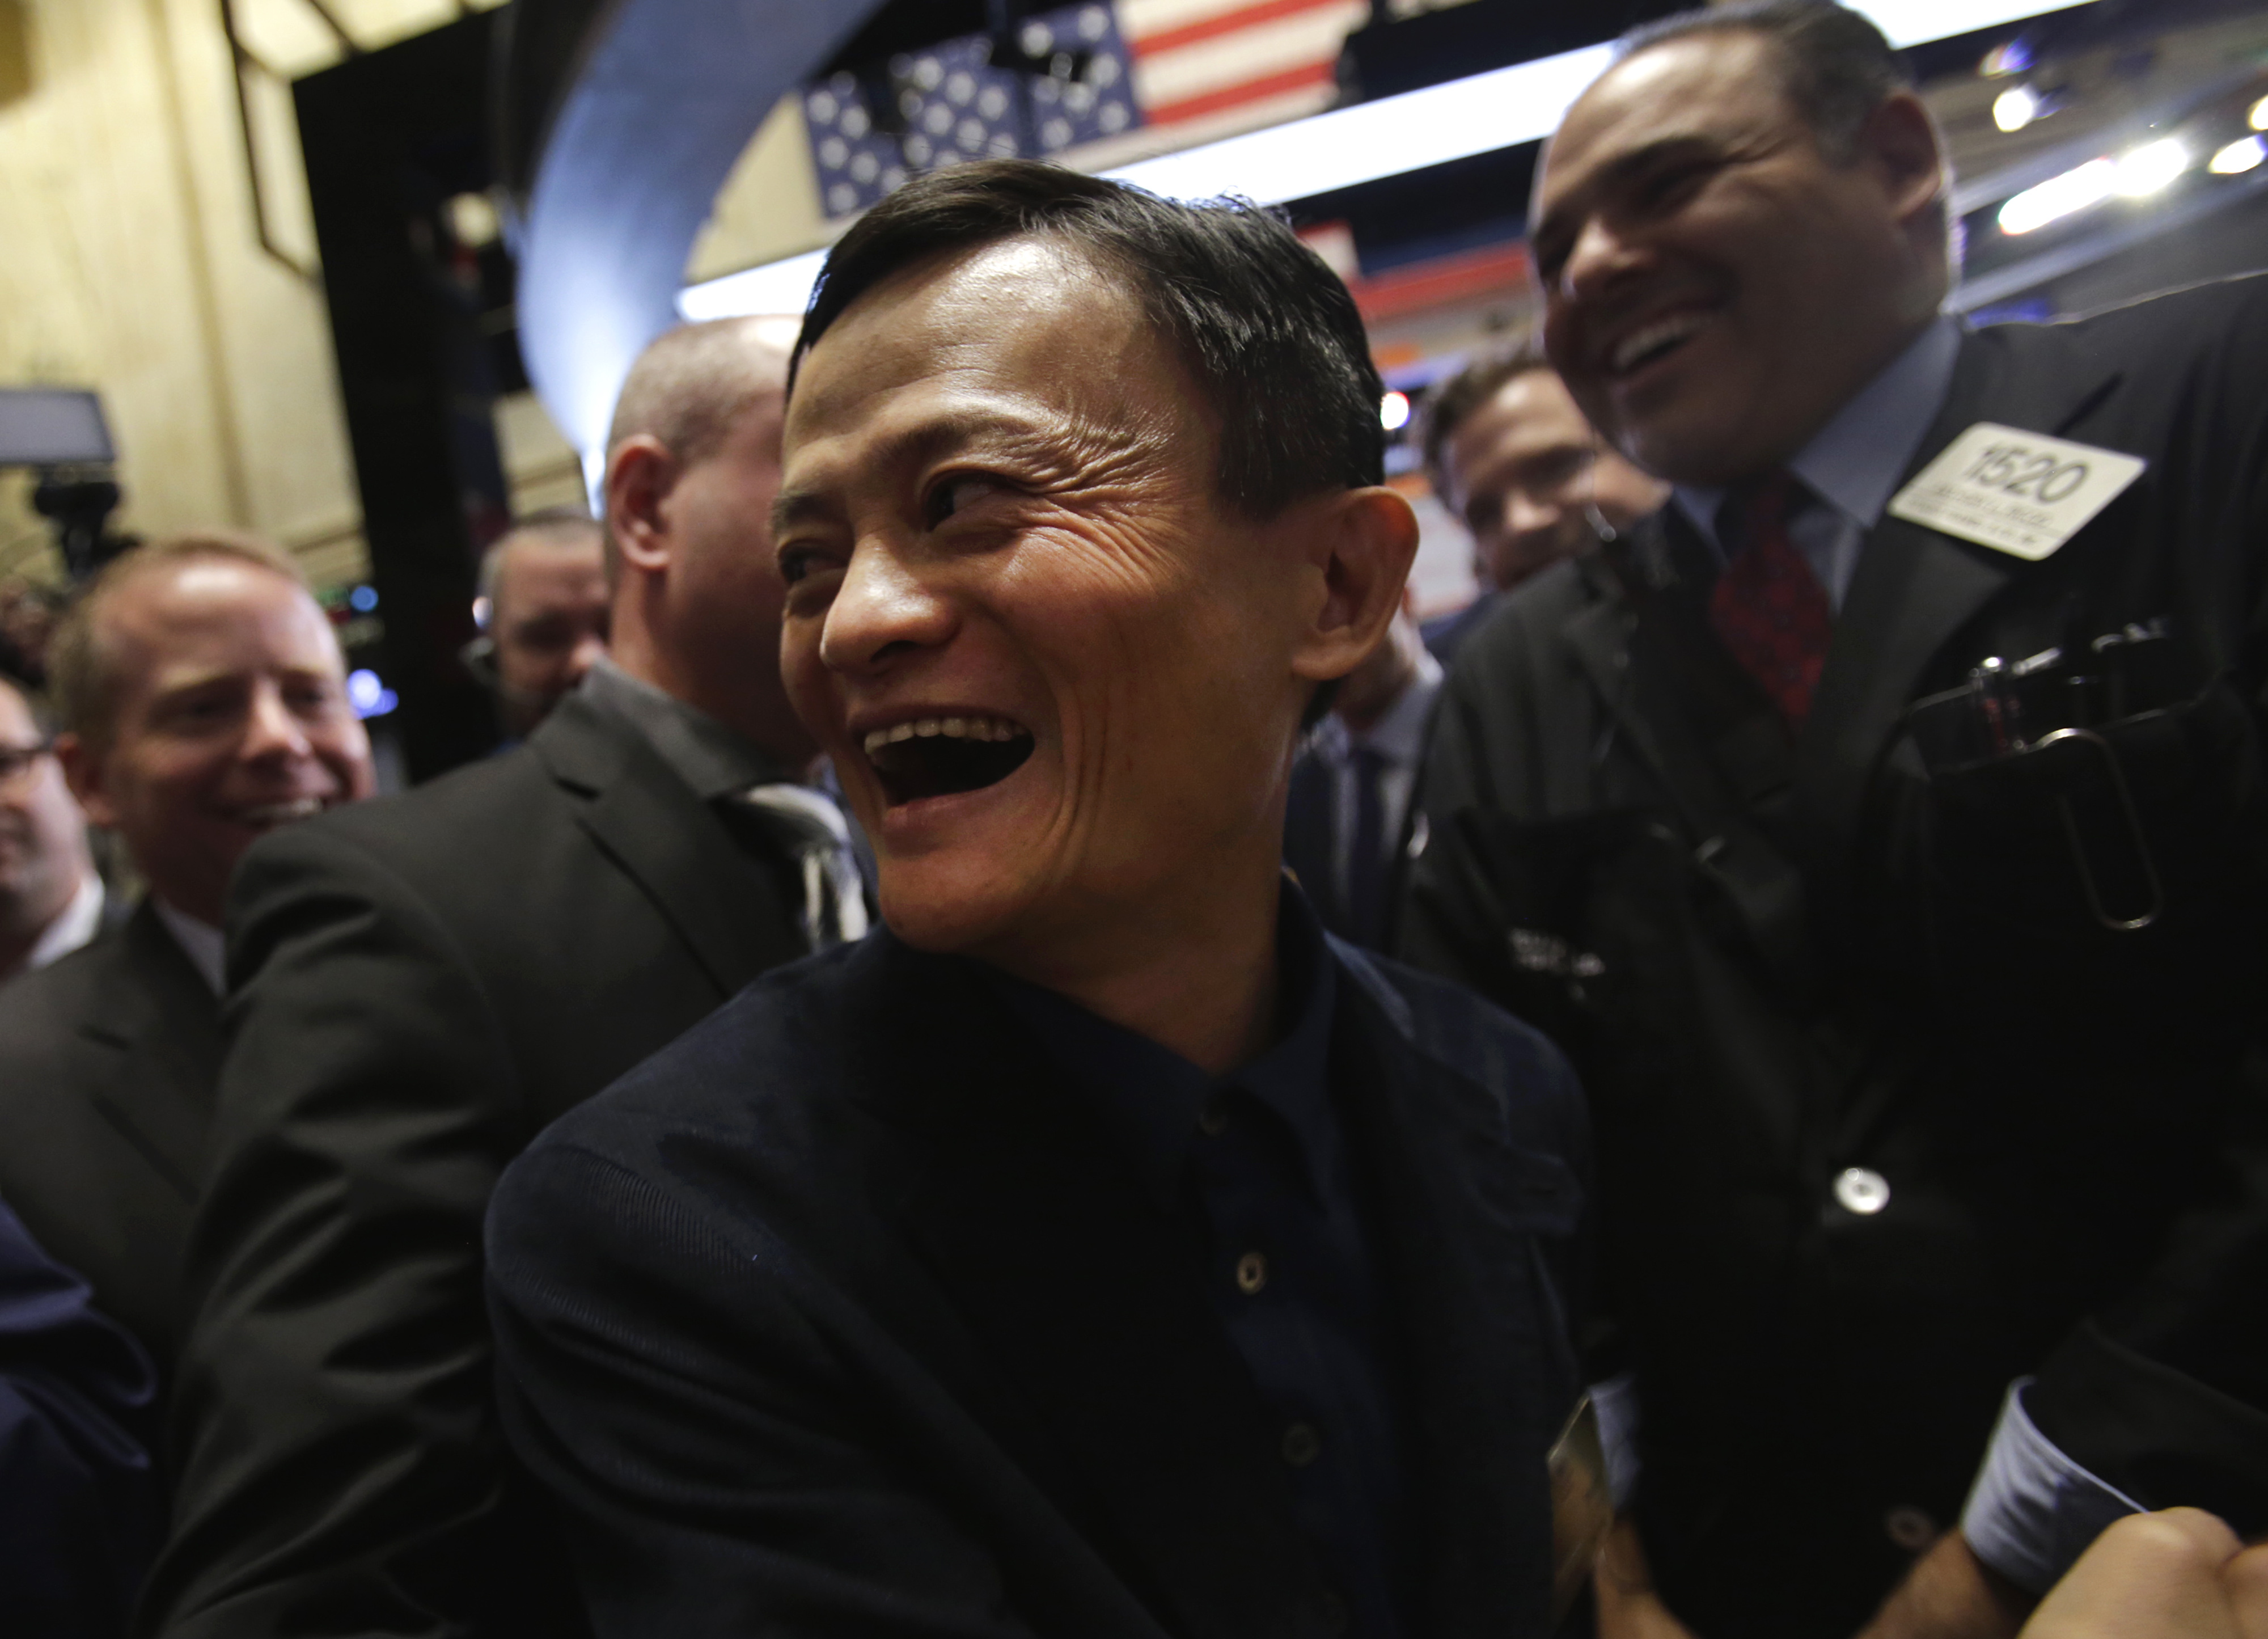 Billionaire Jack Ma, chairman of Alibaba Group Holding Ltd., smiles while touring the floor of the New York Stock Exchange (NYSE) in New York, U.S., on Friday, Sept. 19, 2014. (Bloomberg—Bloomberg via Getty Images)